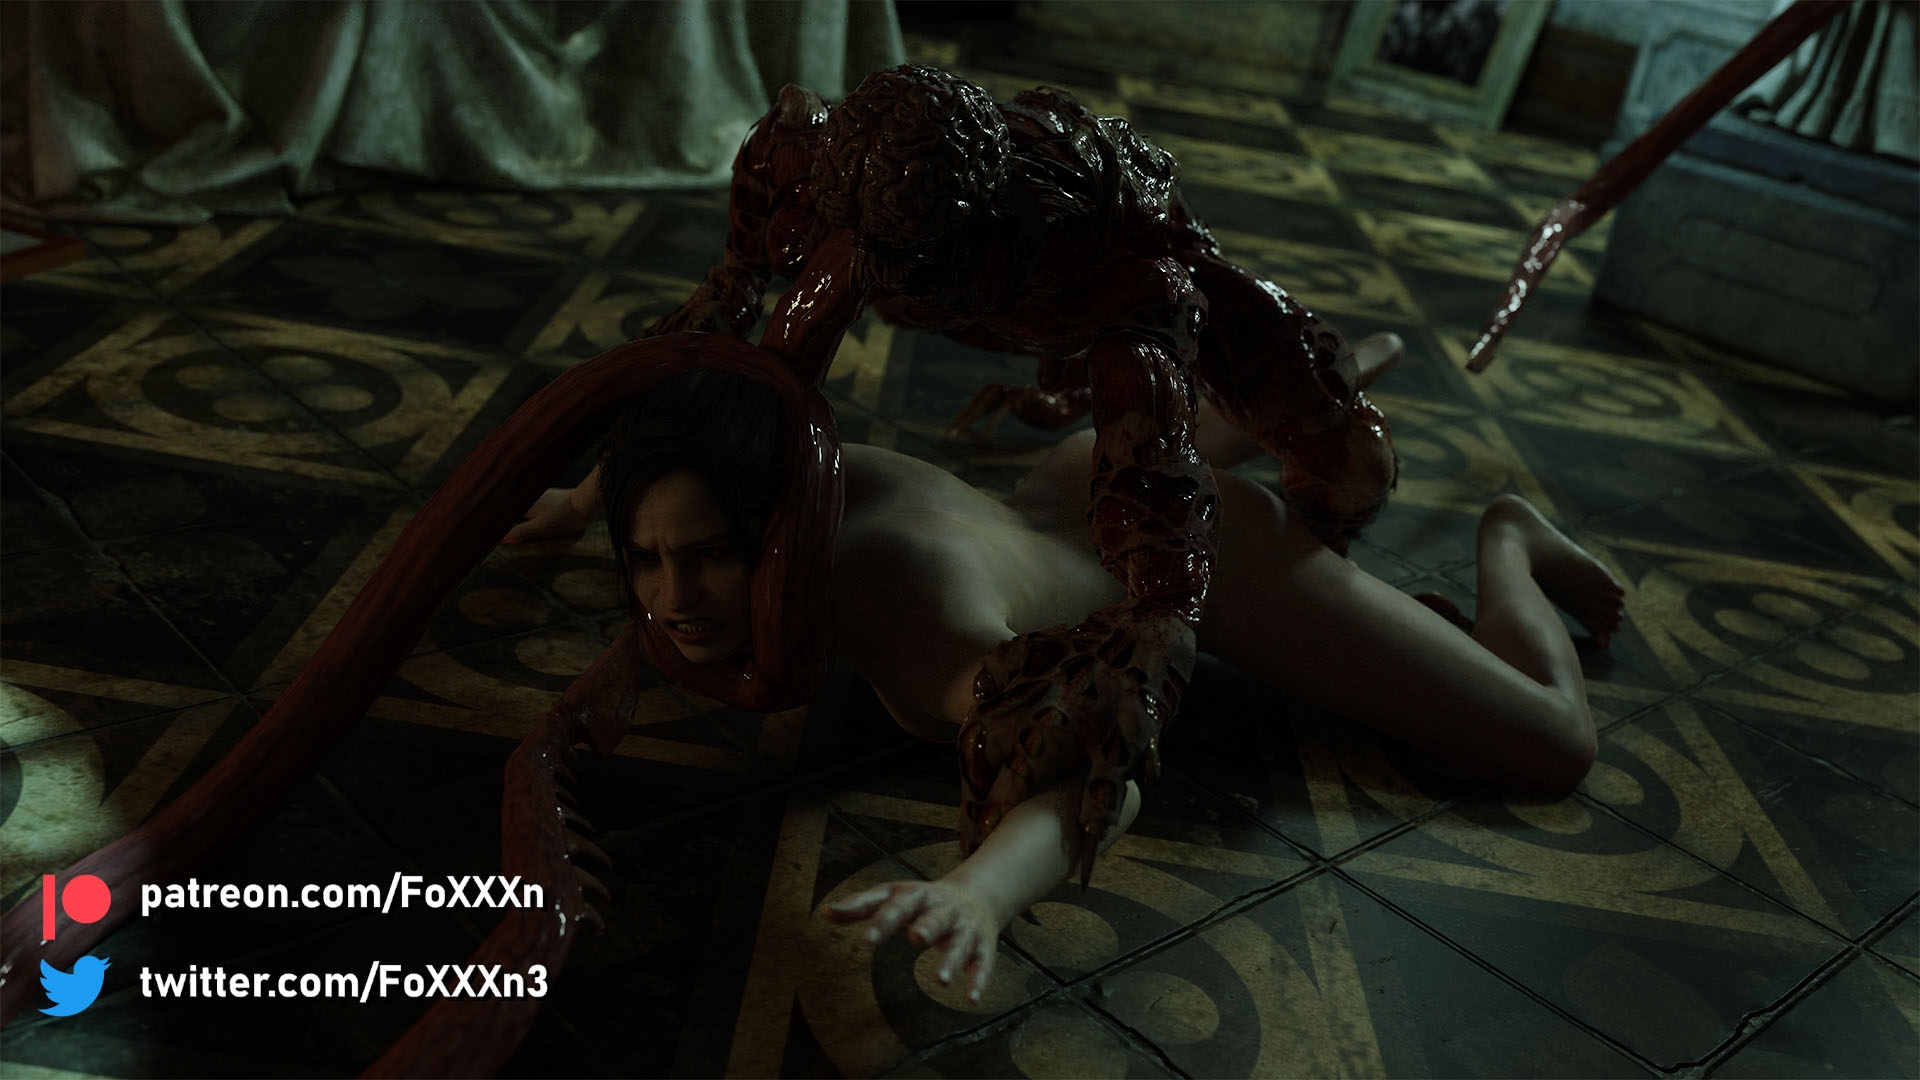 Licker Ambush Jill Valentine Claire Redfield Resident Evil Resident Evil 3 Remake Resident Evil 2 Remake Licker Naked Clothed Monster Caught Rape Tentacles Tentacle Tongue Tongue Out 10